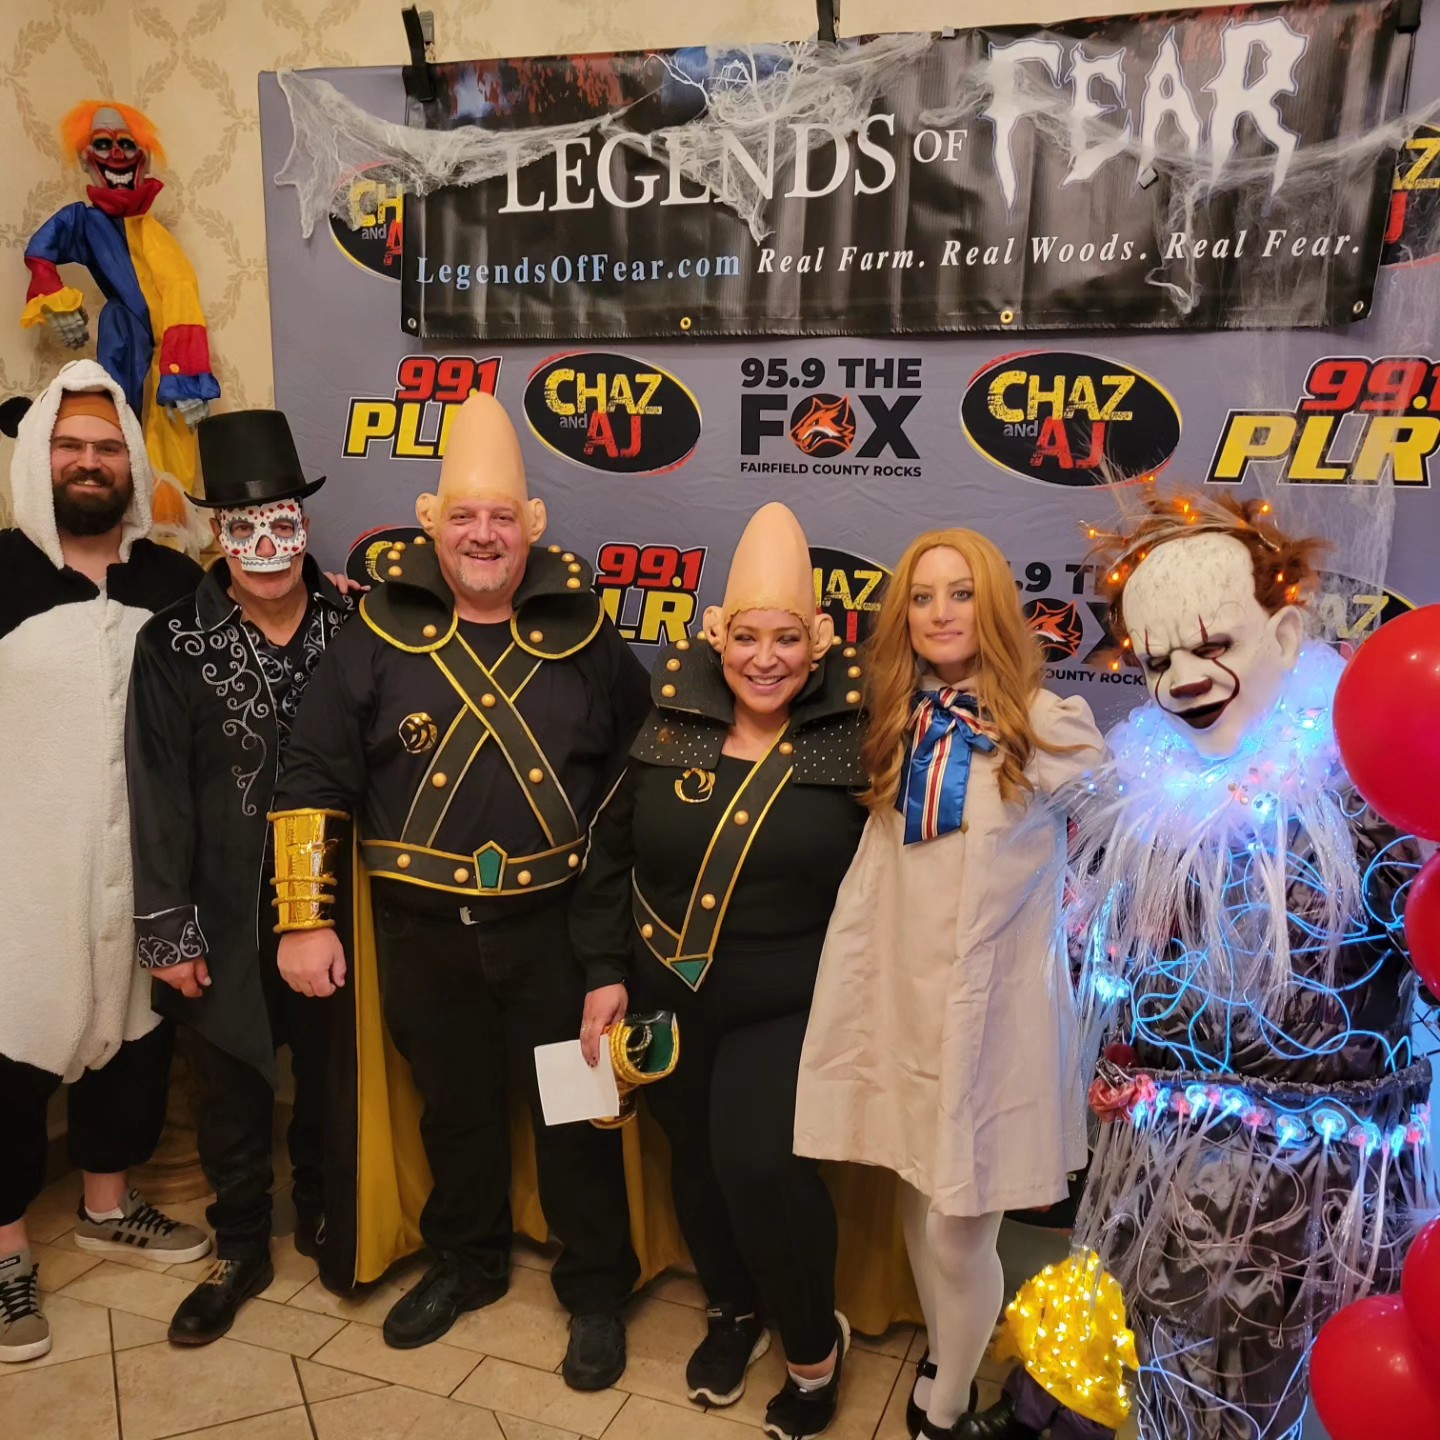 WATCH: Chaz and AJ Legends of Fear Monsters Ball